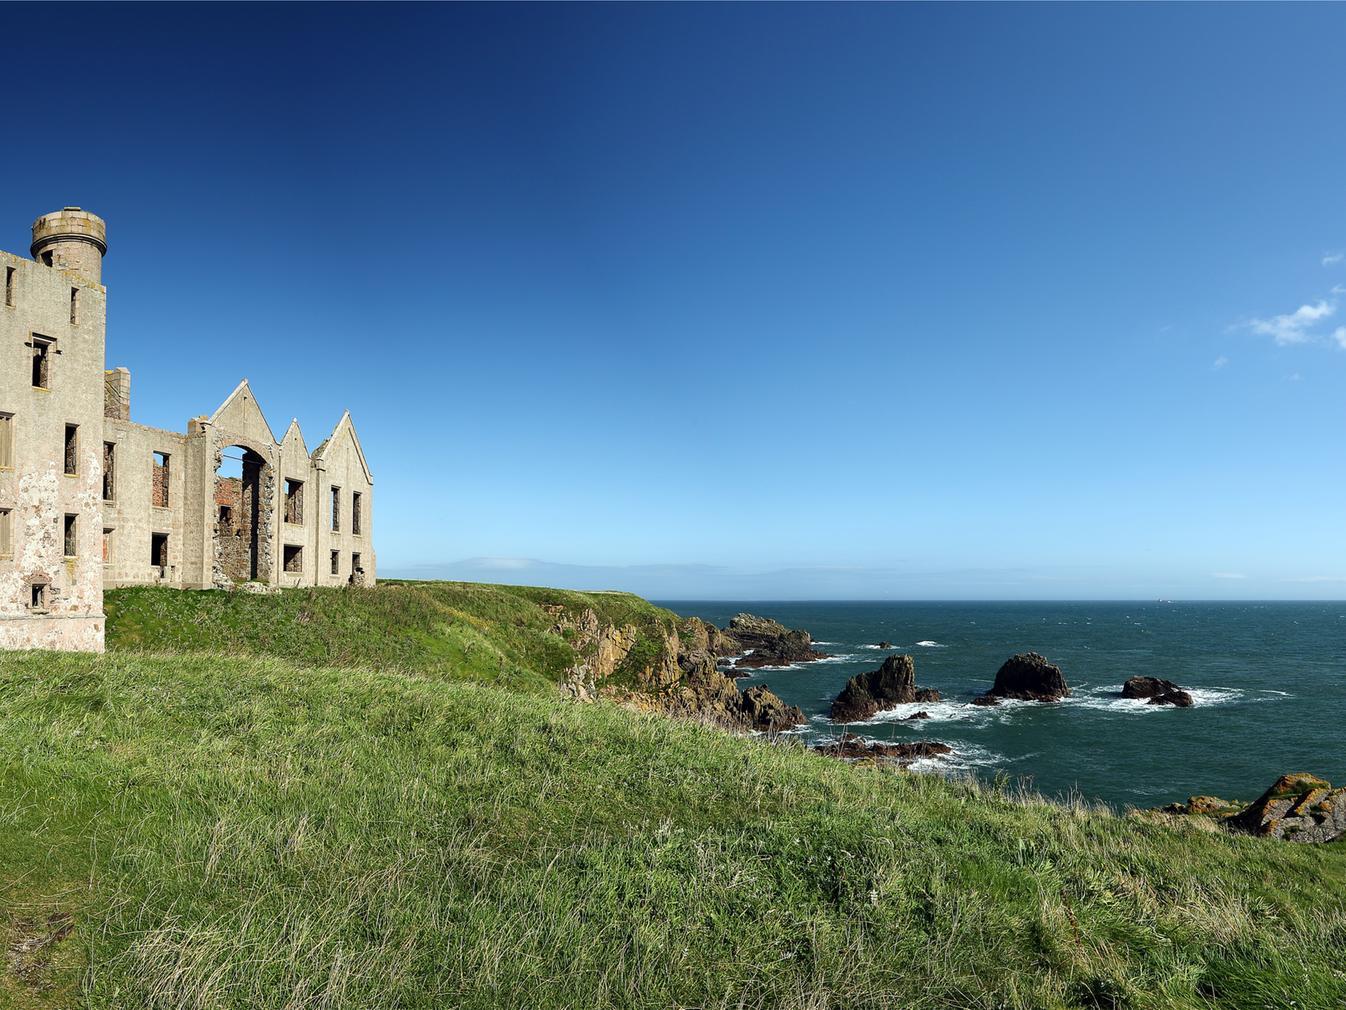 The popular show about Queen Elizabeth II features several locations in Aberdeenshire. Cruden Bay acts as Castle of Meys beach, while Slains Castle doubles as Castle of Mey, which is The Queen Mothers Home in Caithness.